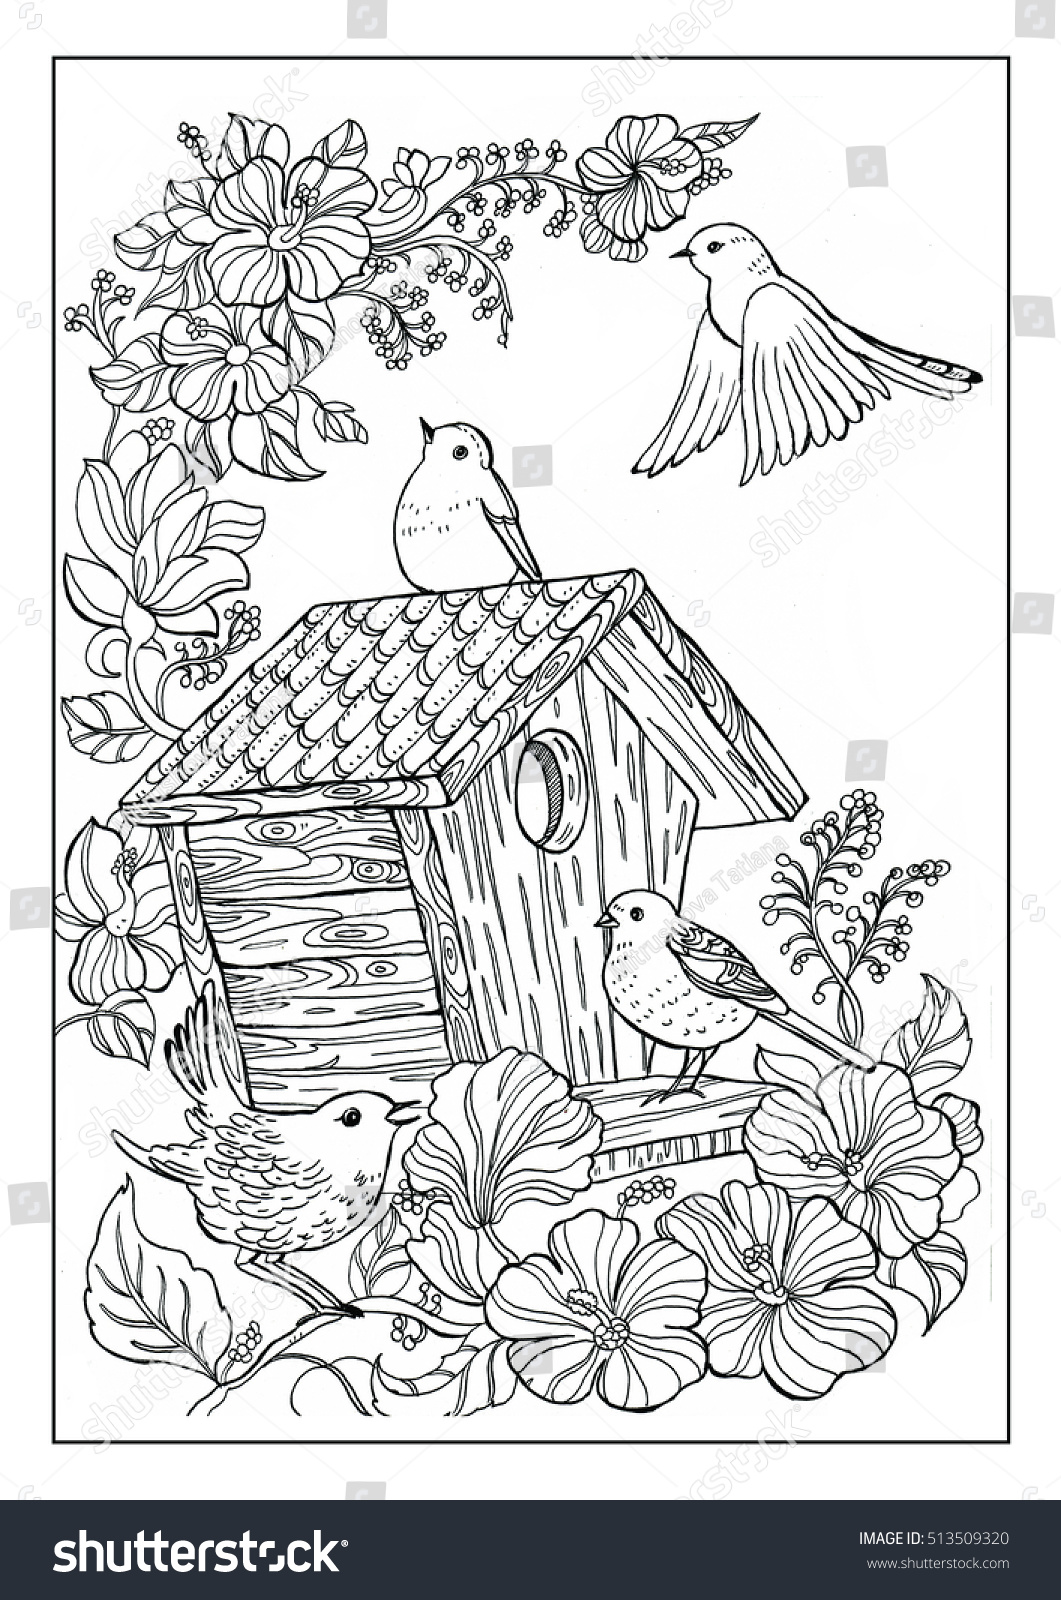 coloring book twenty pages  , Bird and flowers   Royalty Free ...